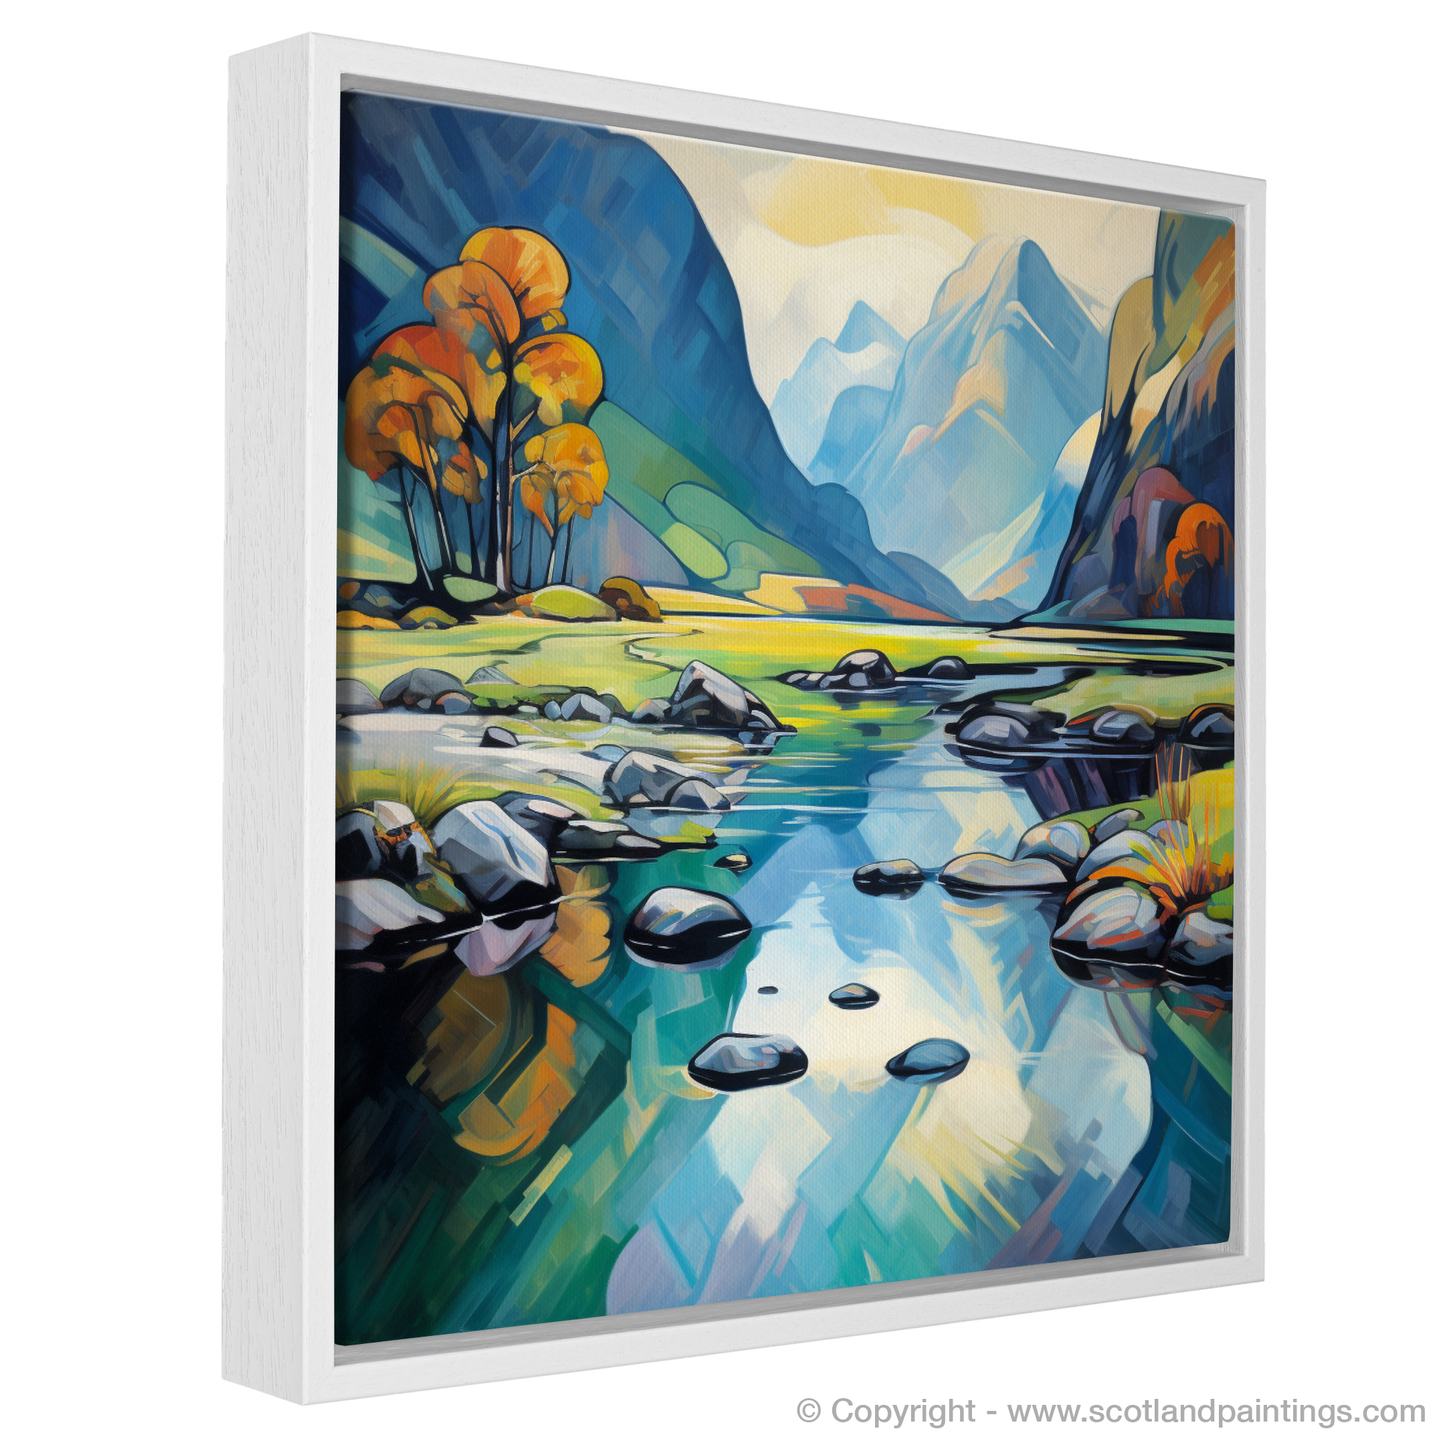 Reflections of River Coe: A Cubist Homage to Glencoe's Majesty